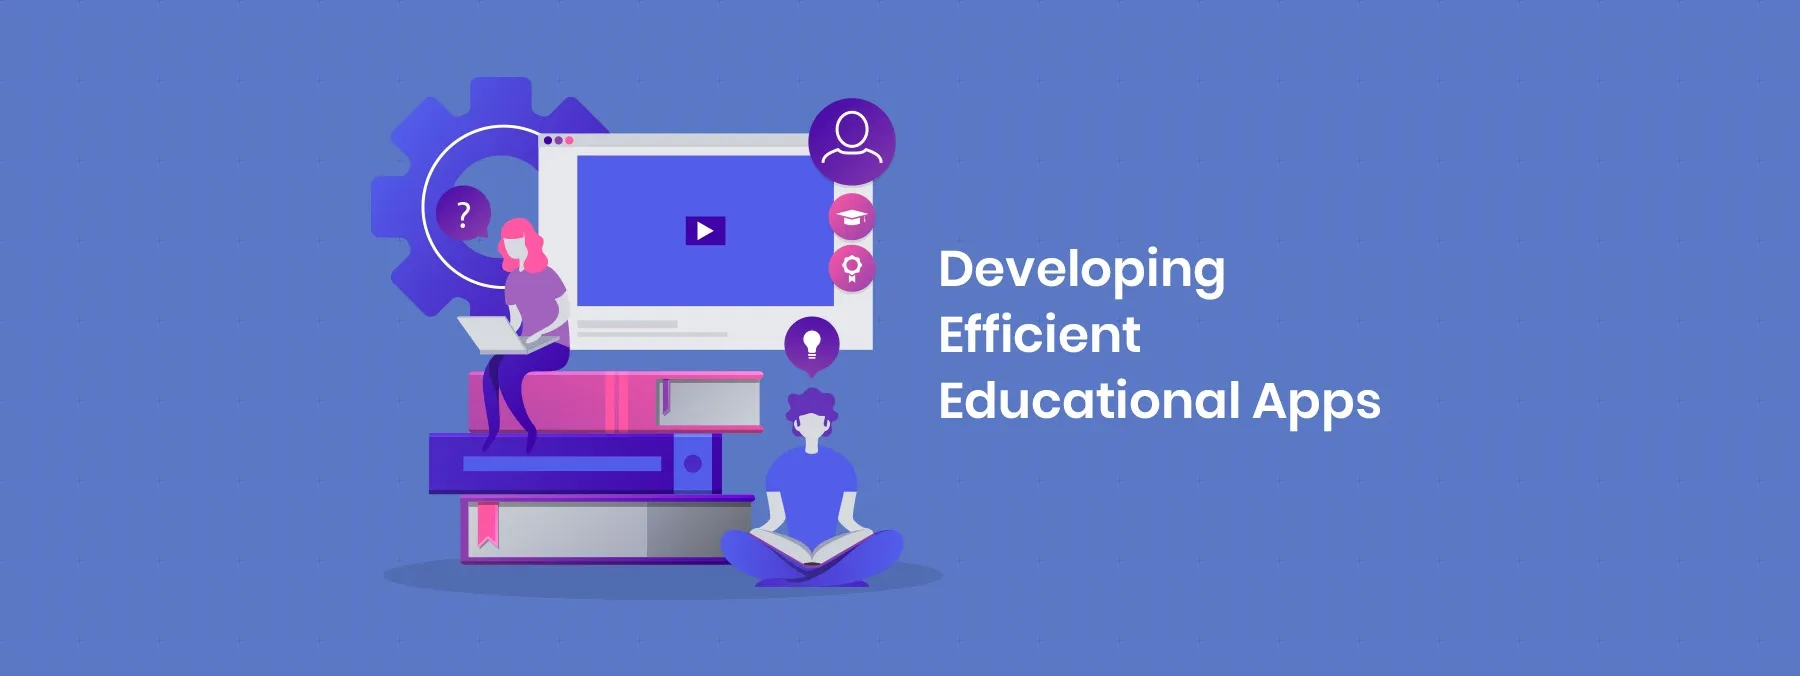 Things to know- Building Efficient Educational Mobile Apps